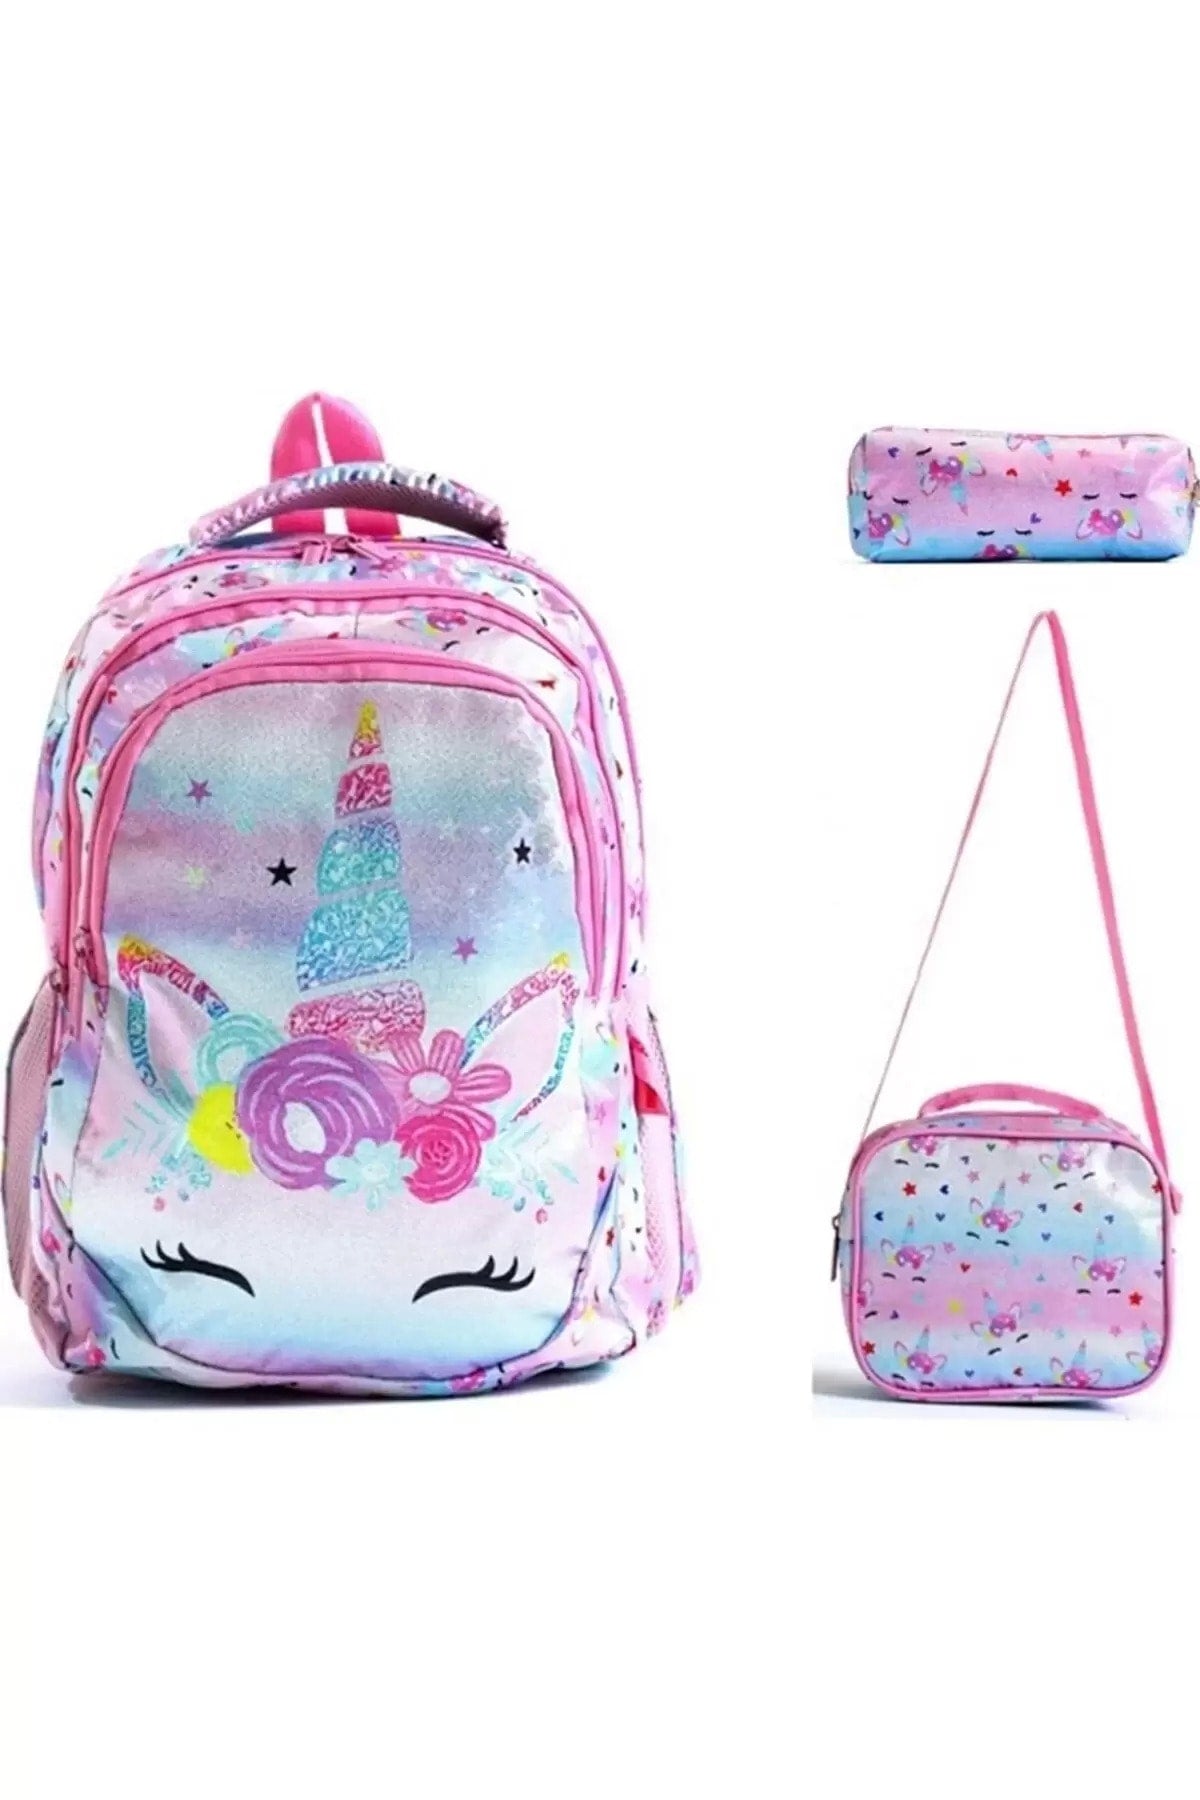 Master Pack Sim Unicorn Patterned Pink Color Baby Girl Backpack Primary School Bag With Food And Pencil Holder